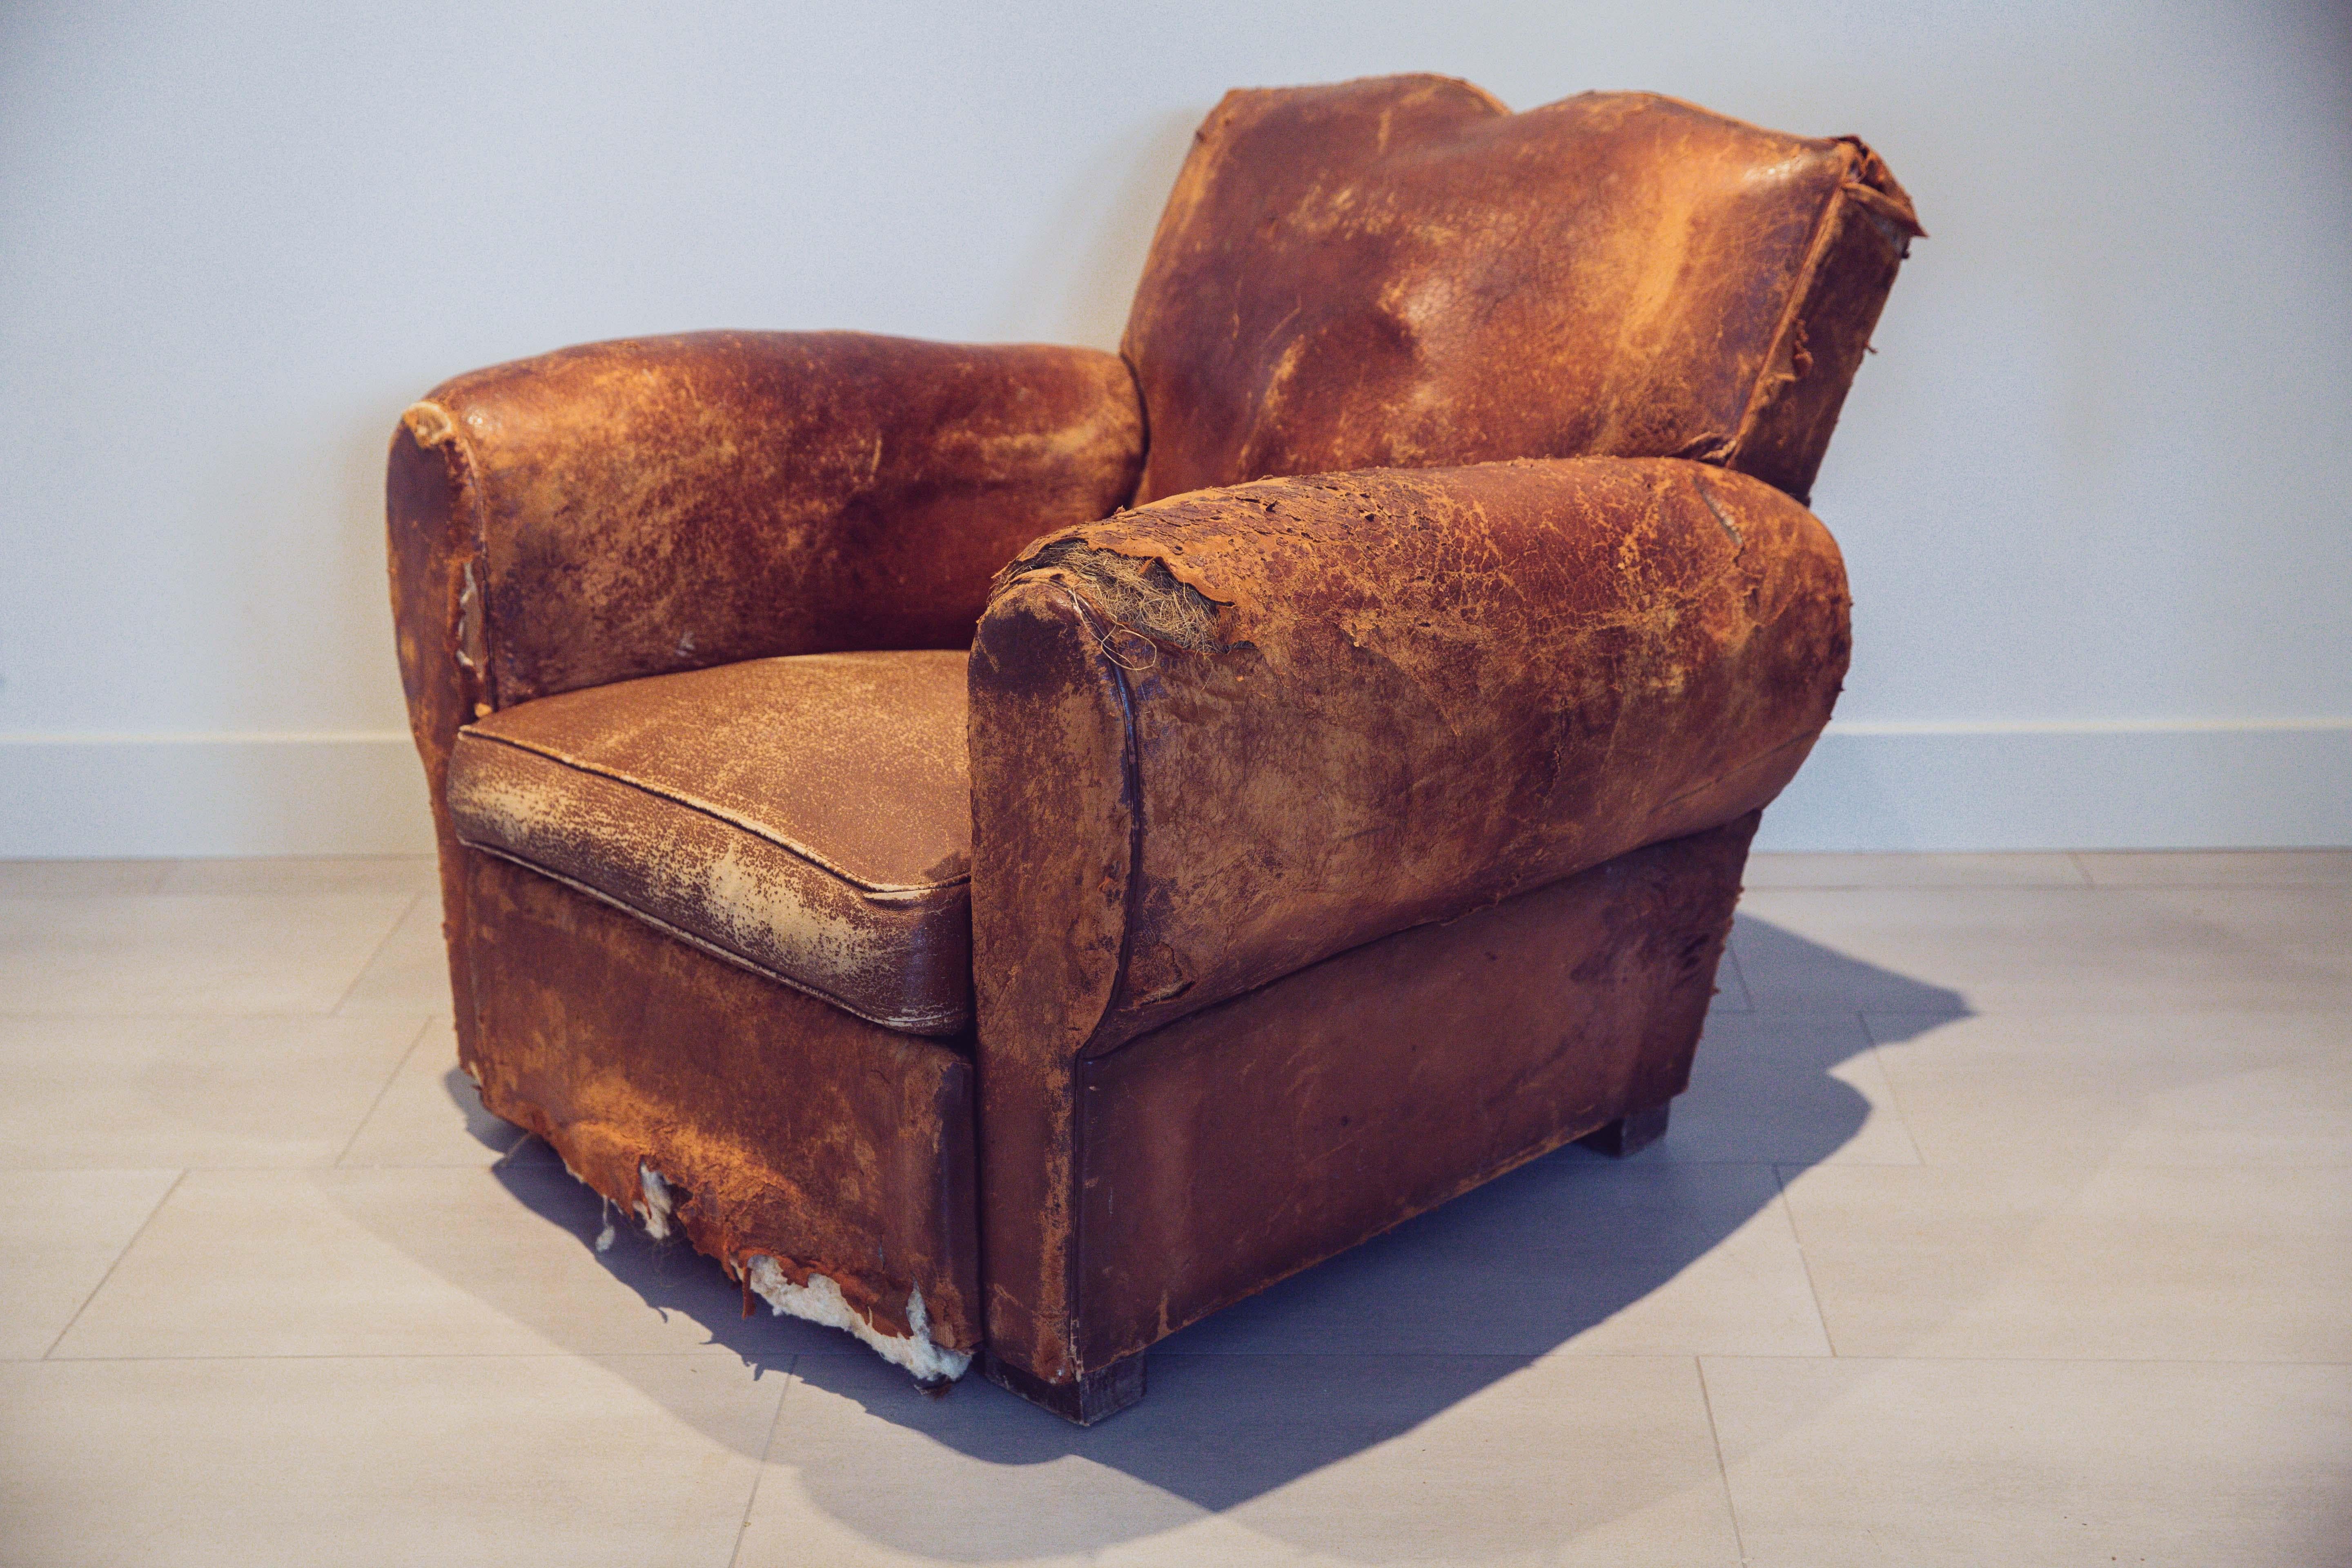 Heavily distressed French Art Deco club chair. Upholstered in a cognac leather, features a distinctive French mustache seat back and large balloon arms. In original condition with great wear. Could be a restoration project, or just leave it the way